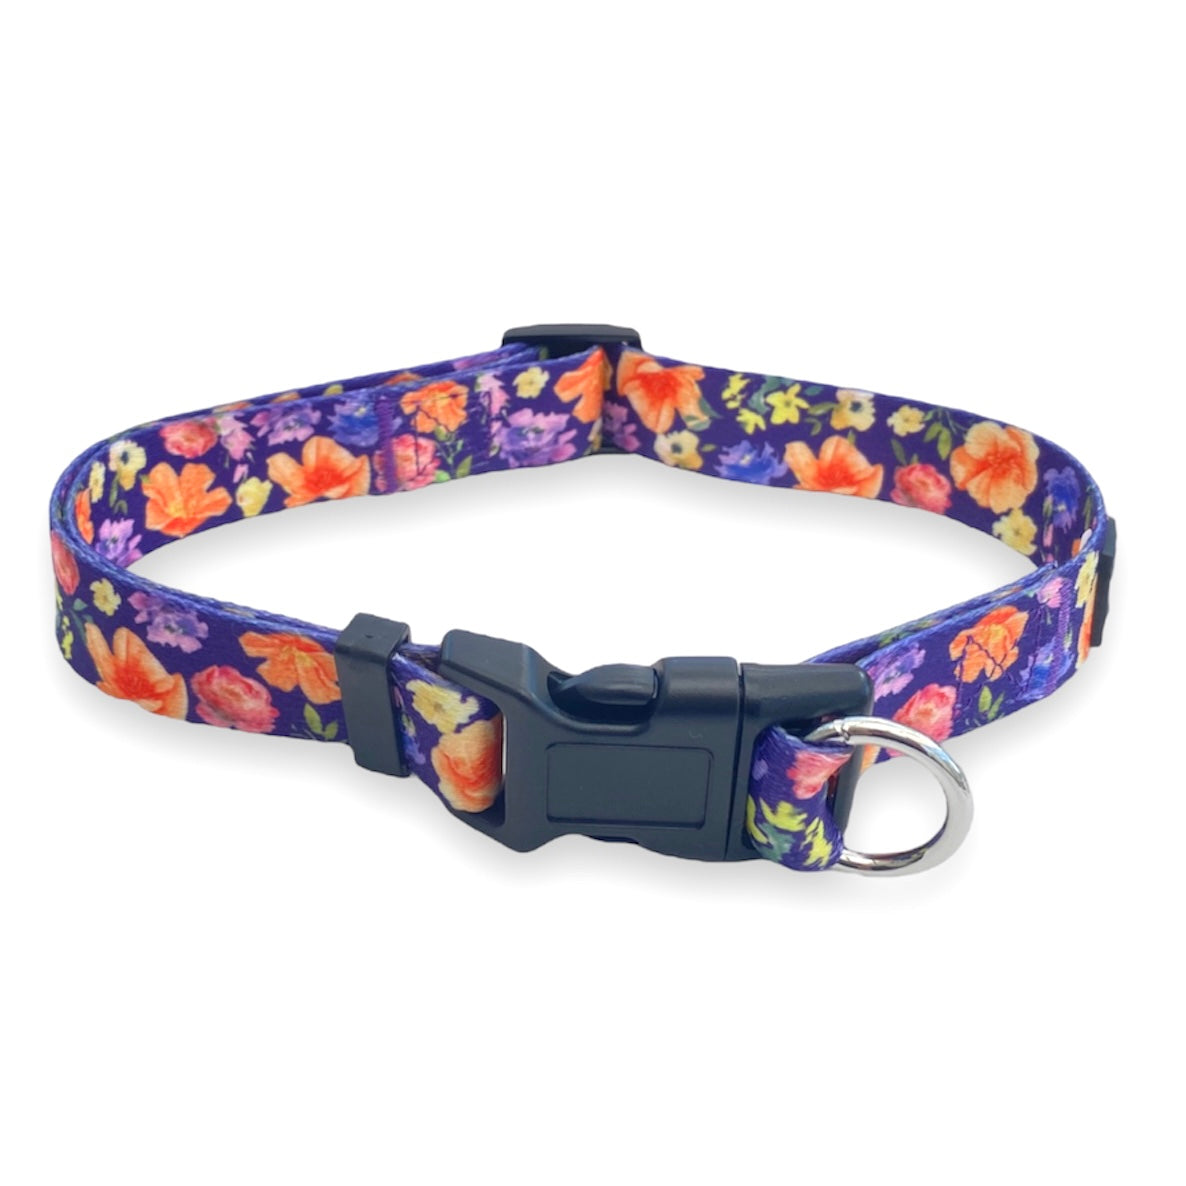 a photo of a purple floral safe cinch dog collar by fearless pet